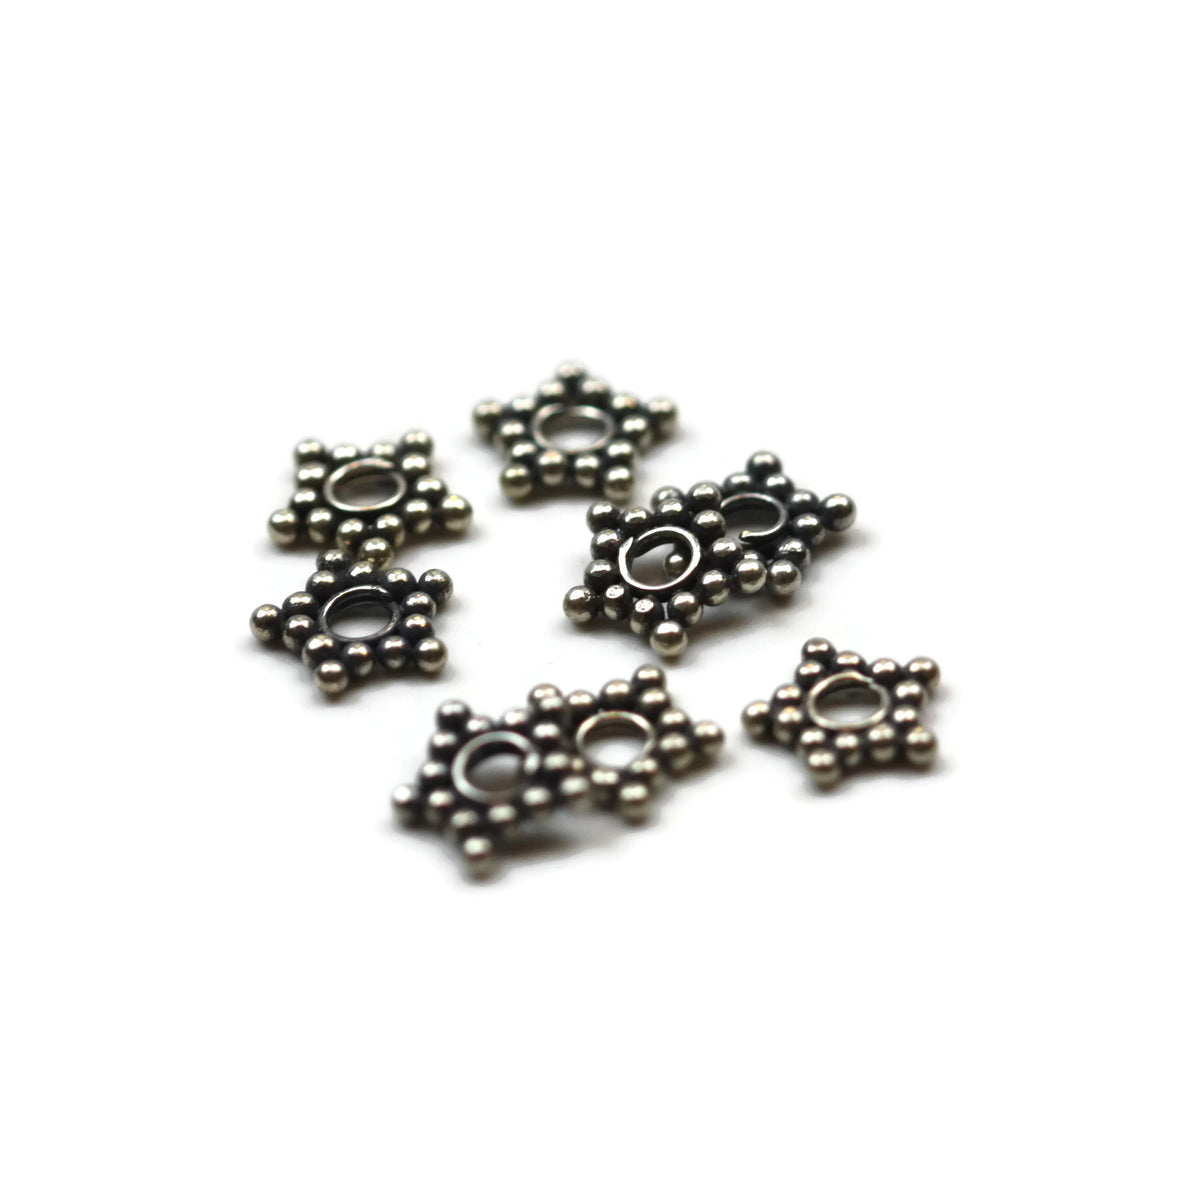 Bali Bead Sterling Silver Star Daisy Spacer 8 mm